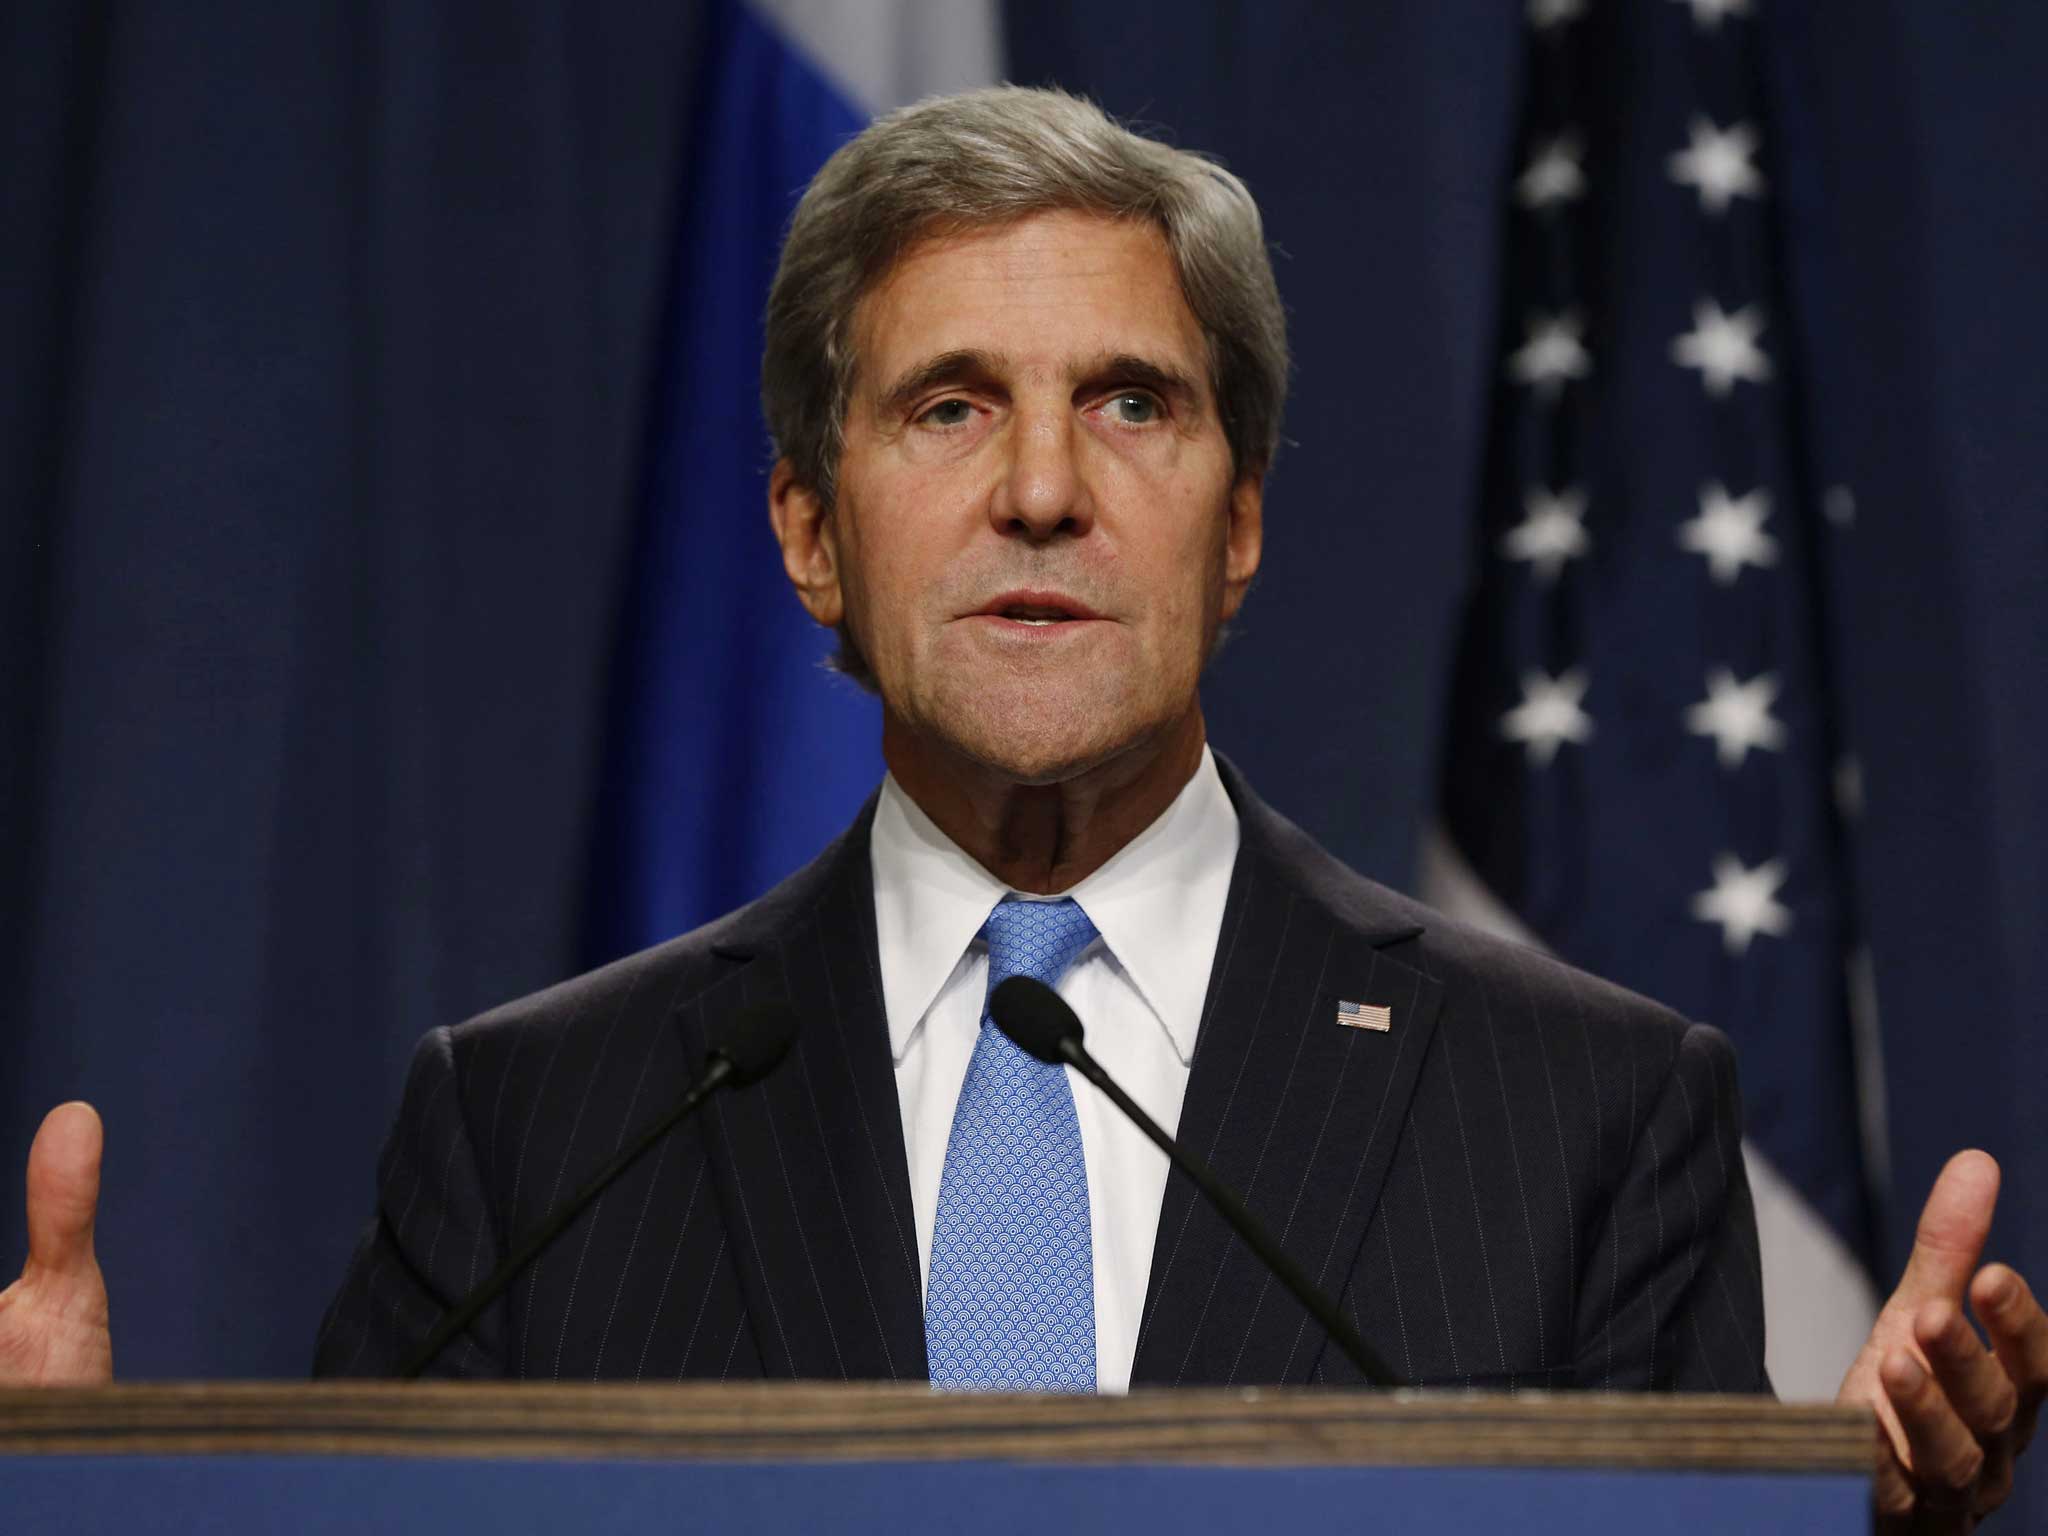 John Kerry opens swiftly-convened talks on Syria's chemical weapons